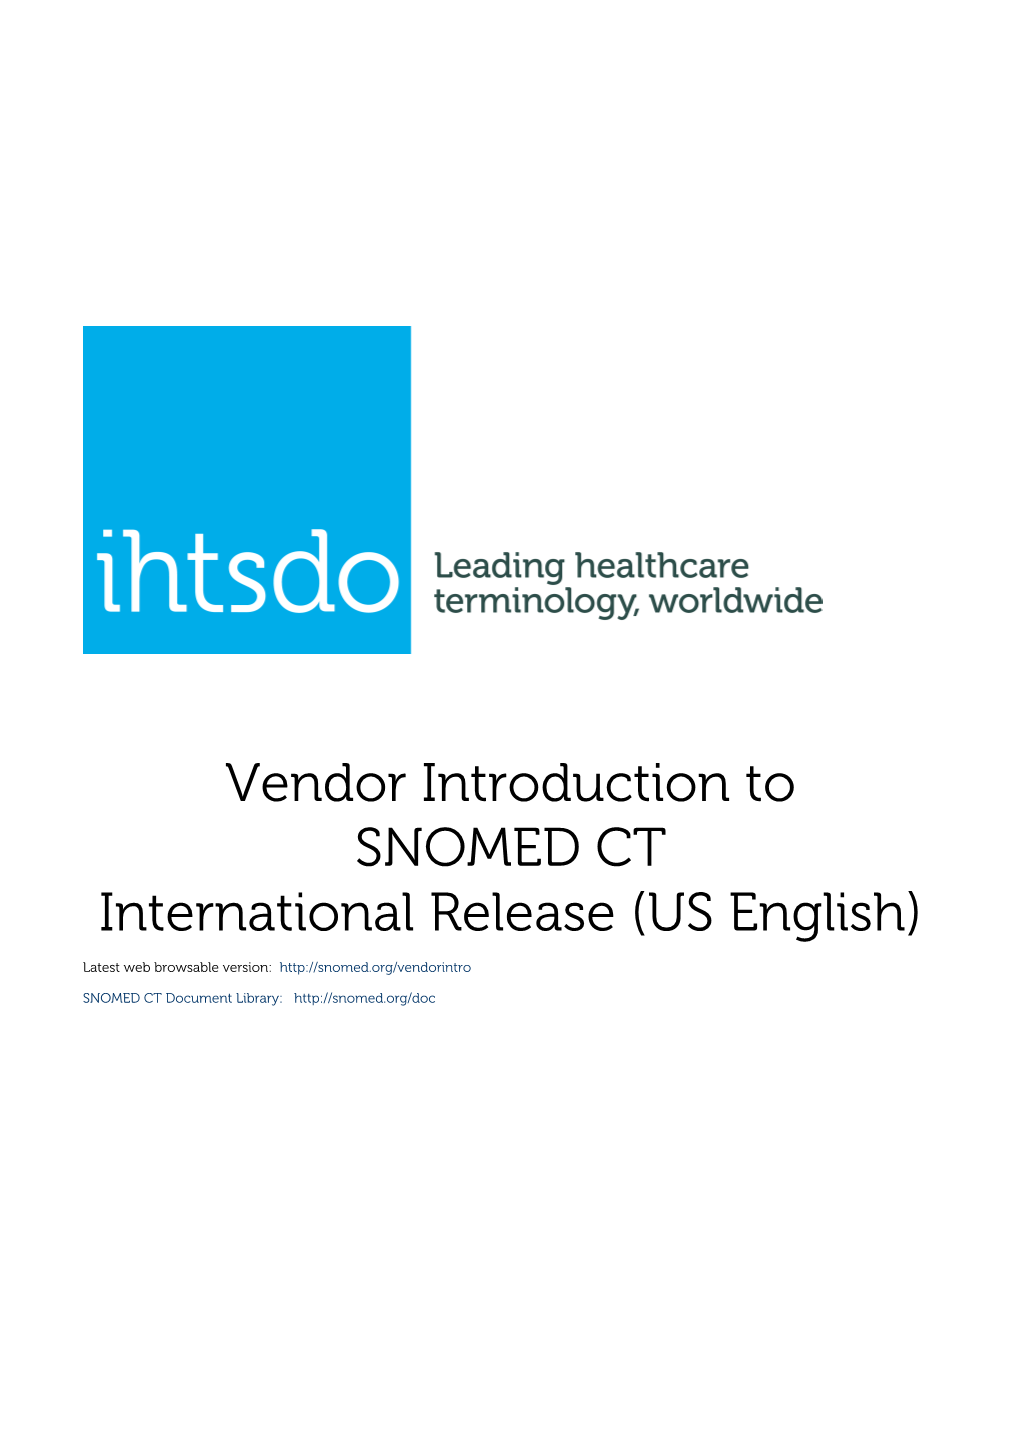 Vendor Introduction to SNOMED CT International Release (US English)